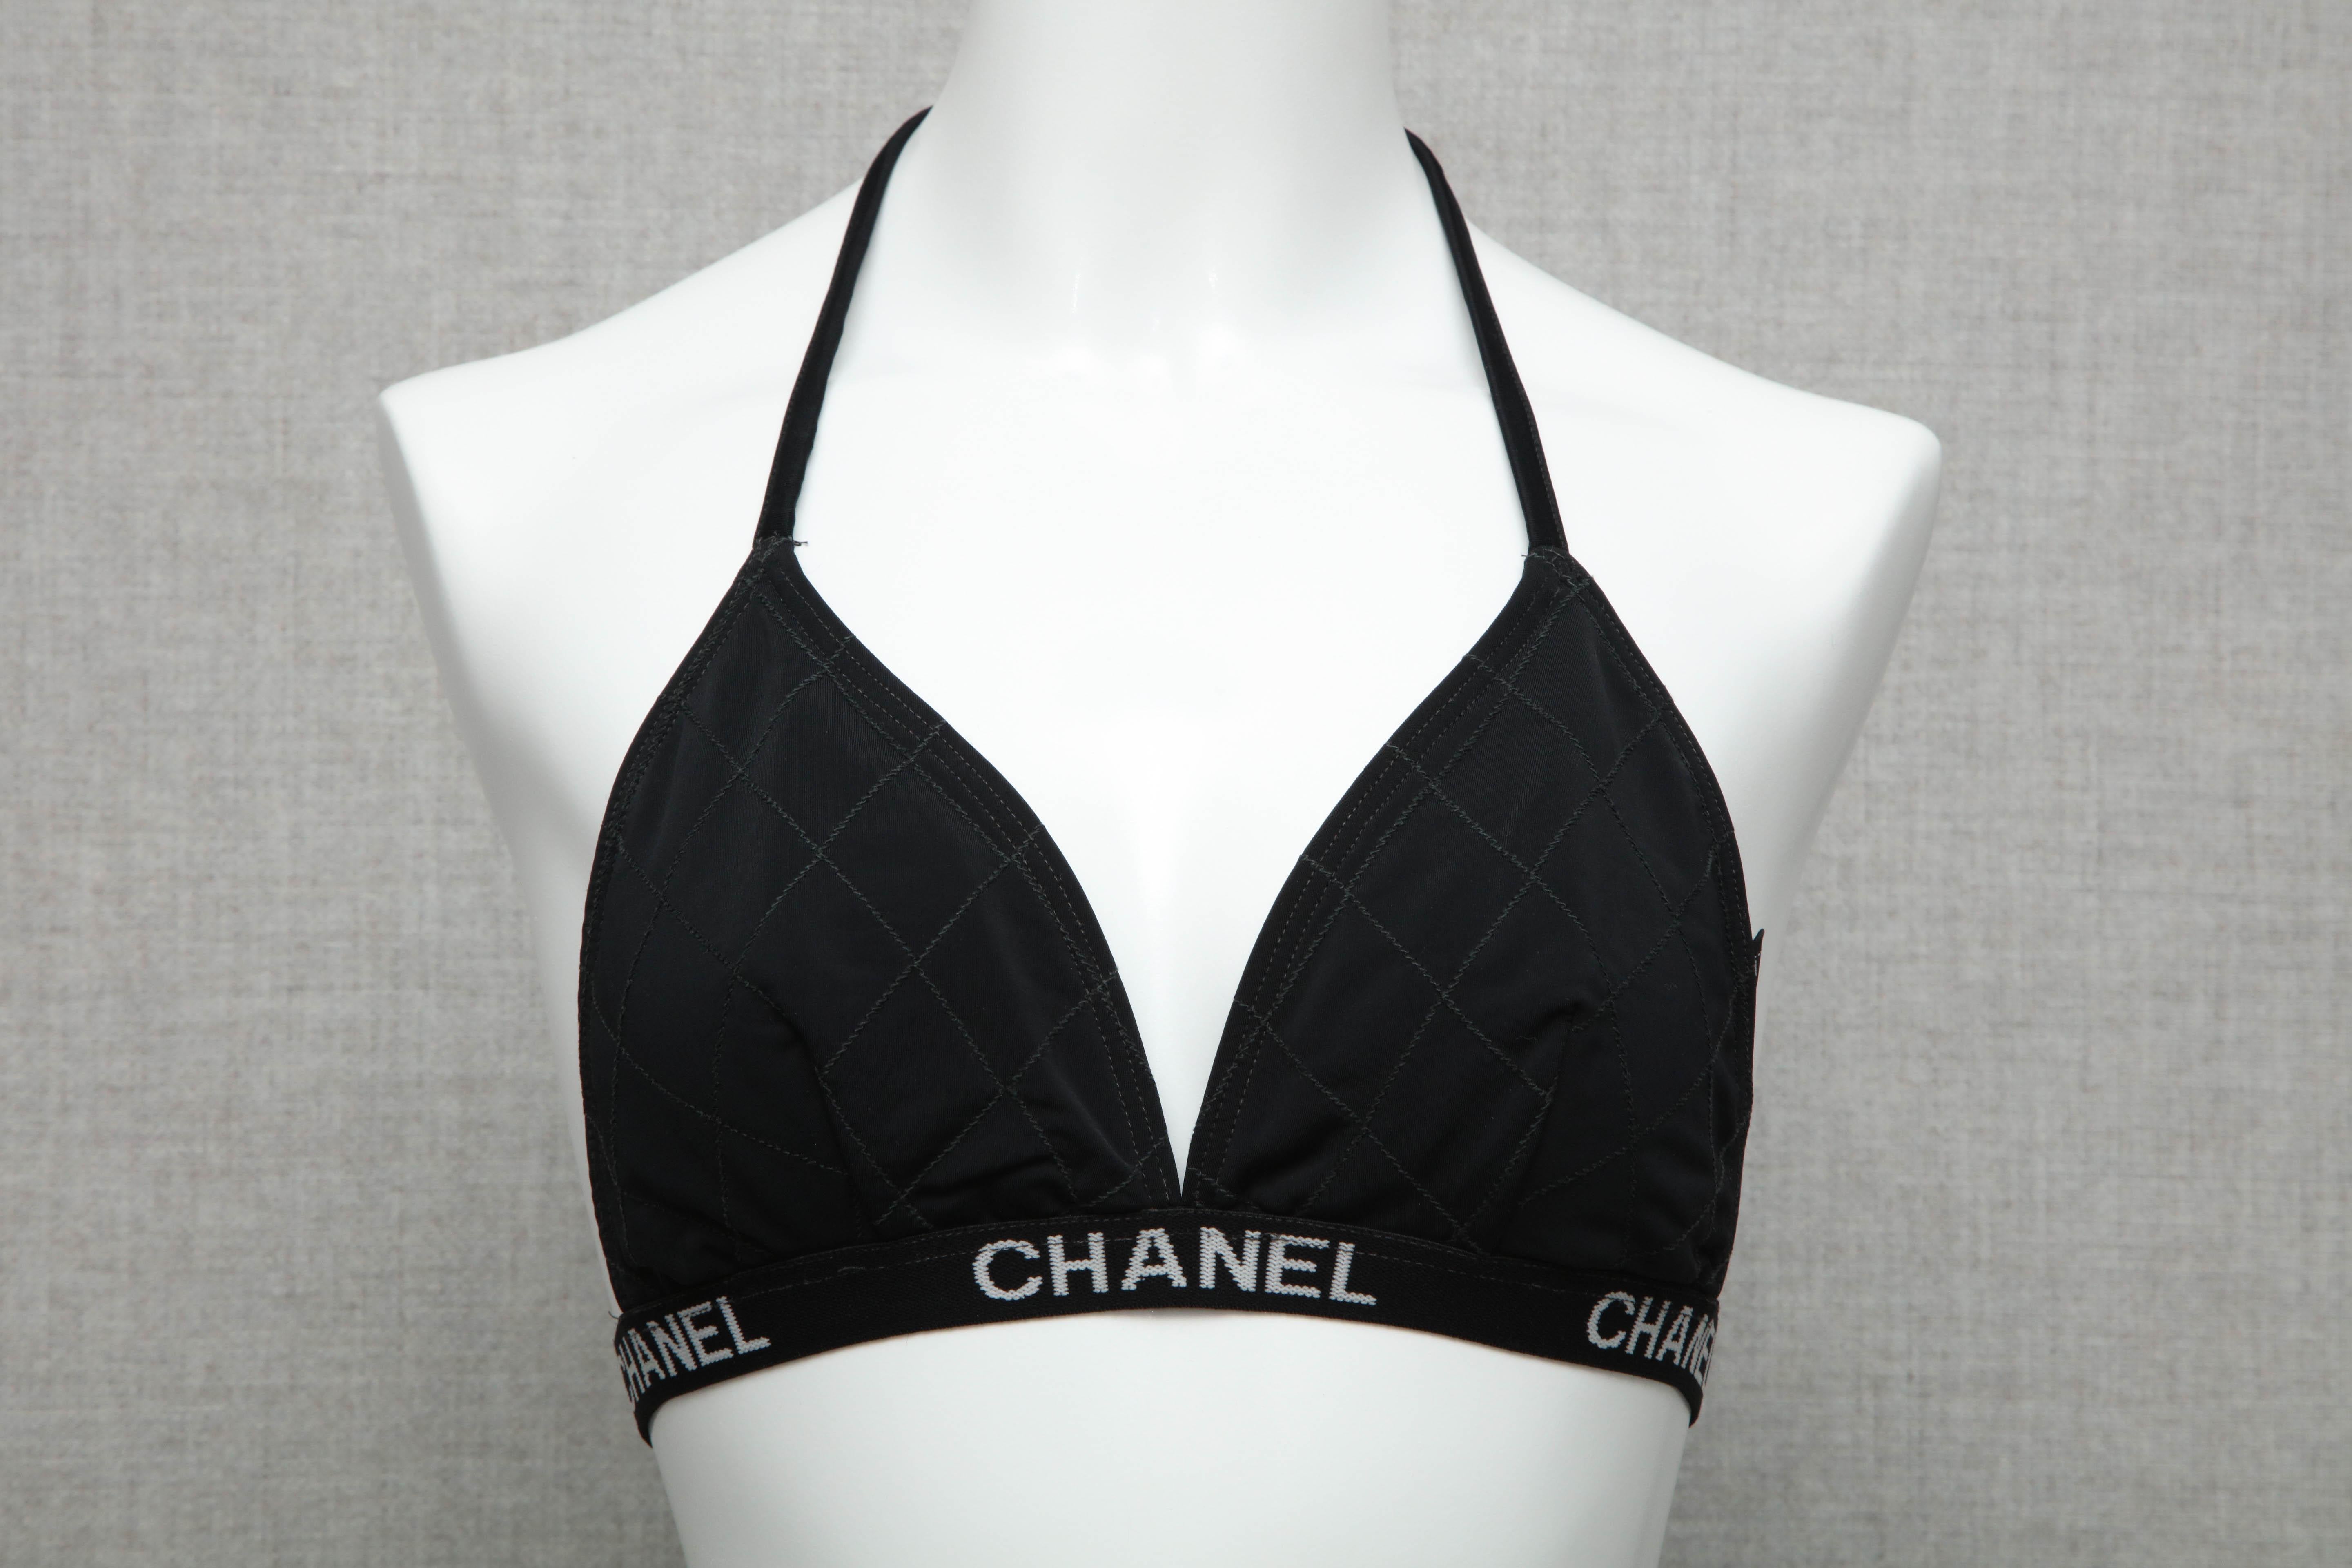 Extremely rare vintage Chanel black bikini in black and white.

Size: 38